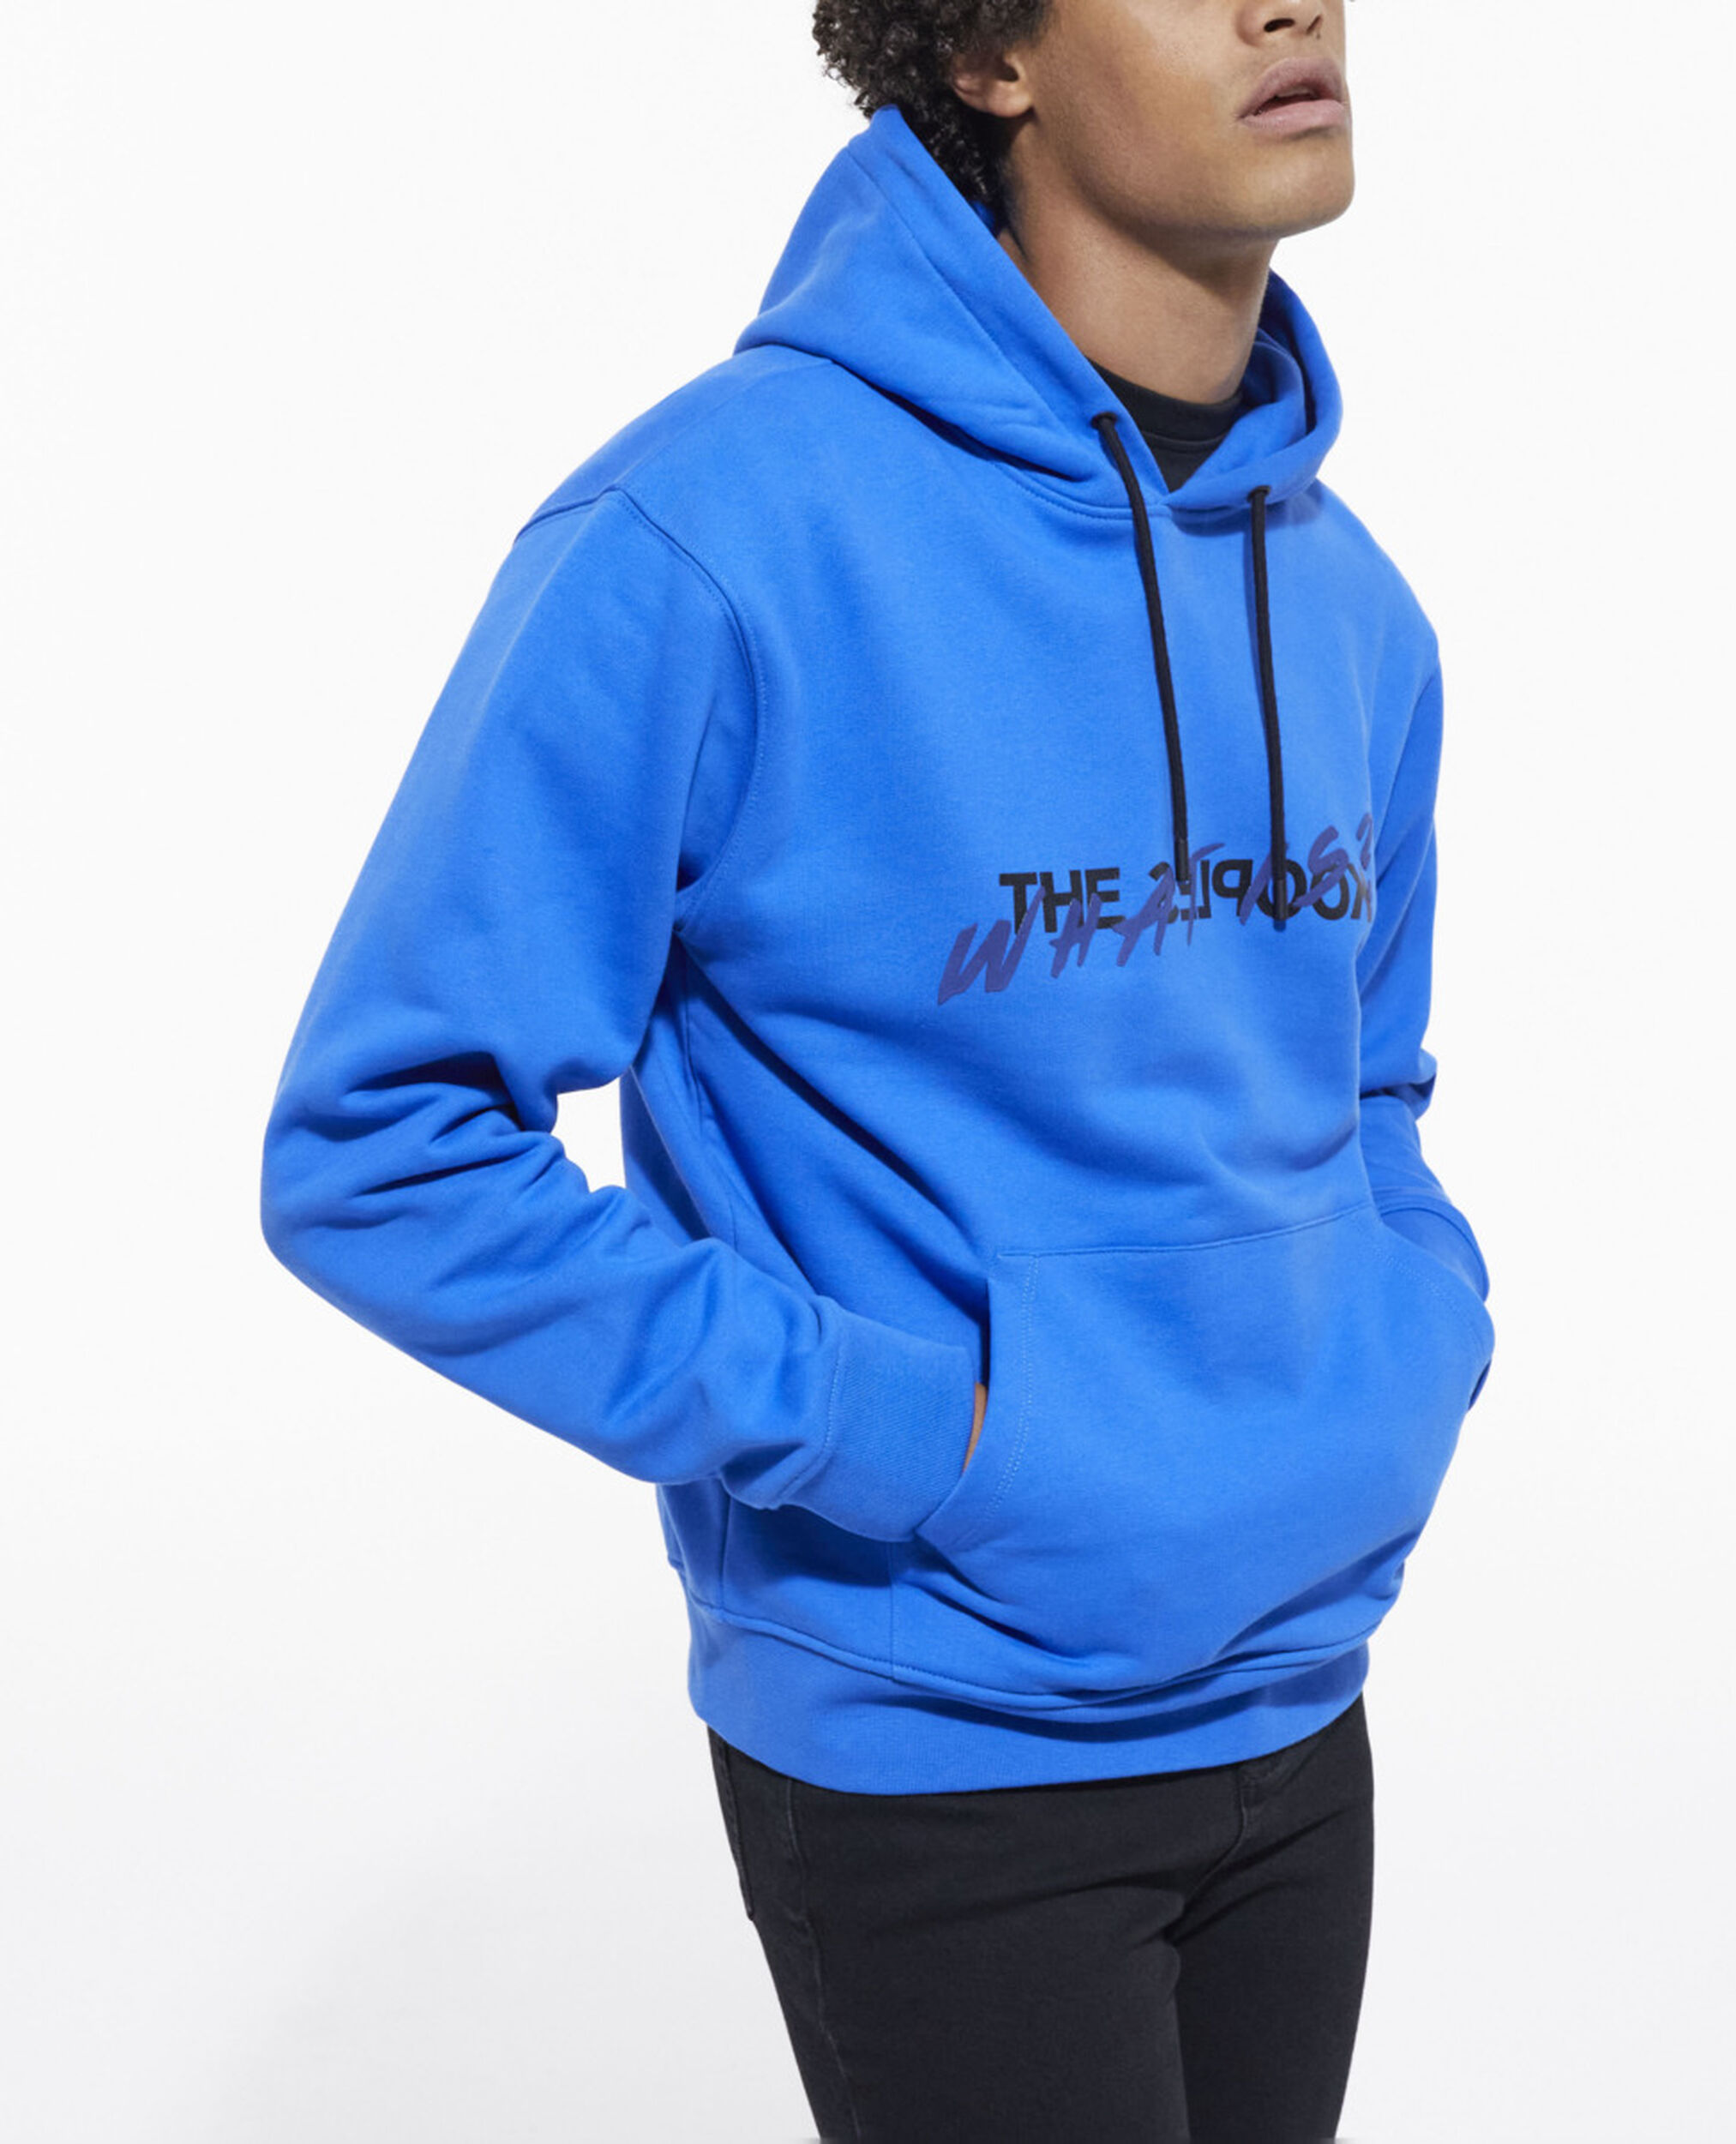 Sudadera What is azul, INK BLUE, hi-res image number null